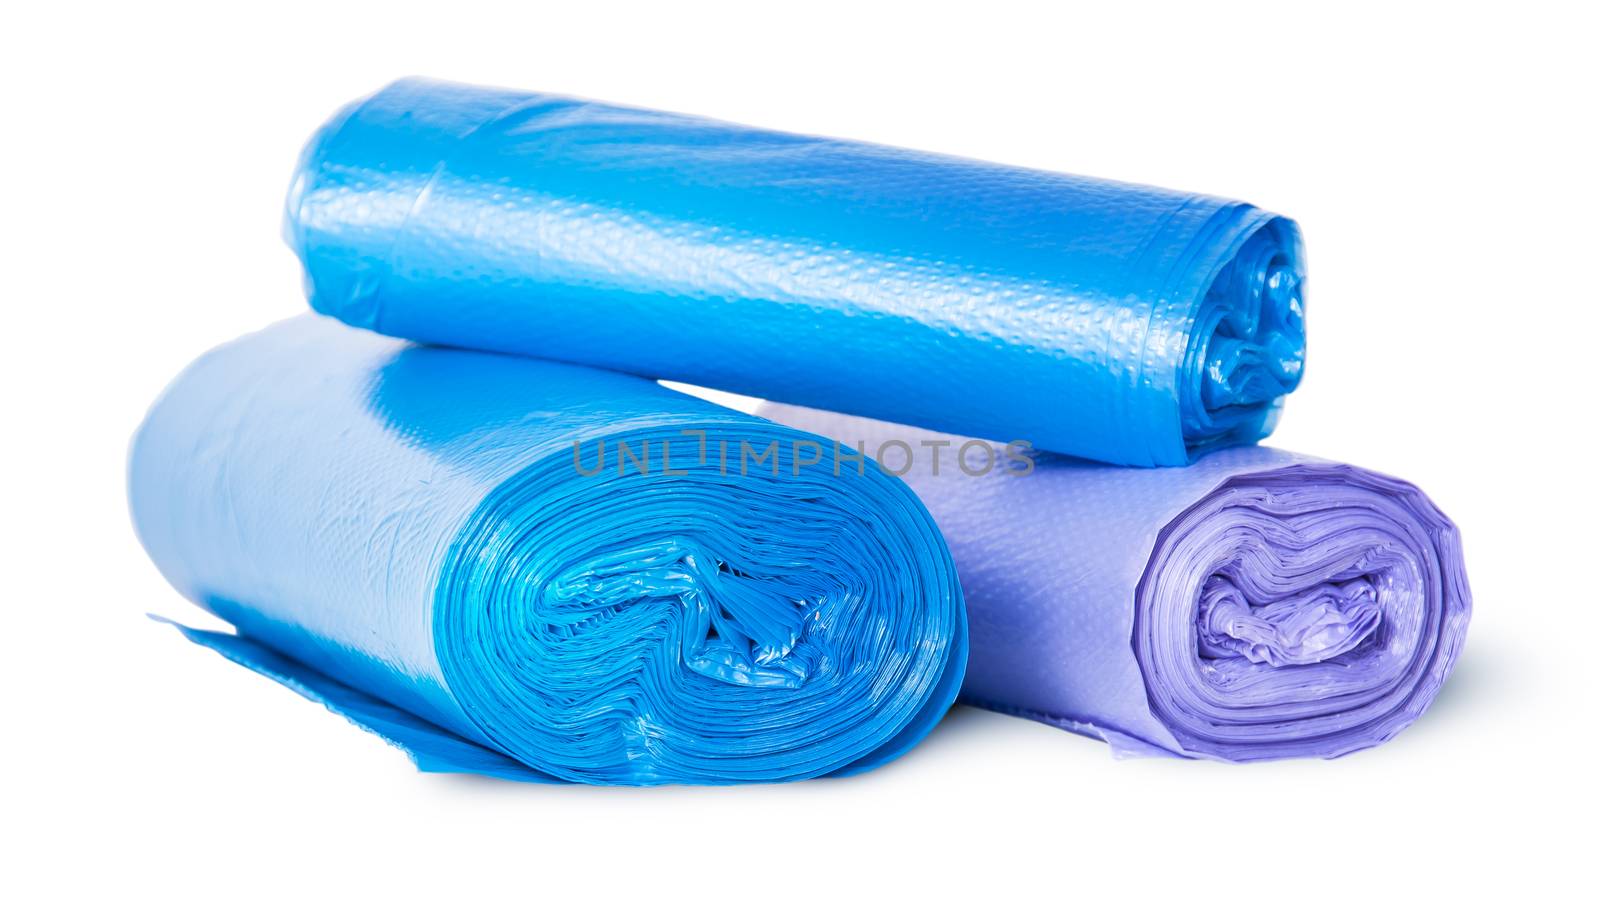 Multicolored rolls of plastic garbage bags isolated on white background